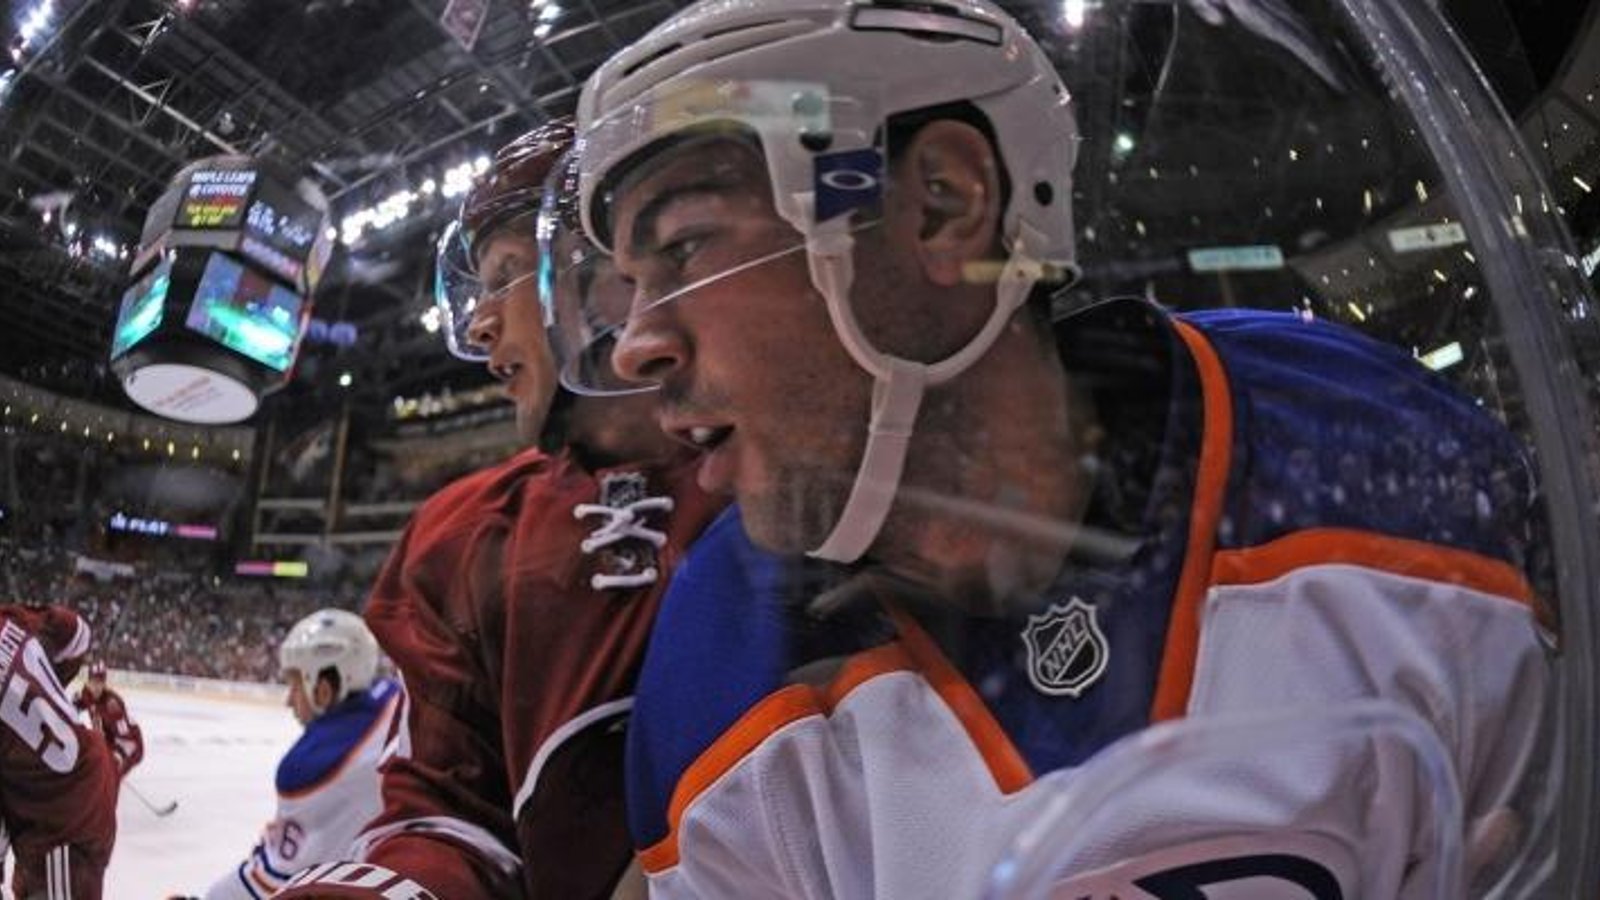 Former Oiler appears to blame fans for his poor performance with the team.